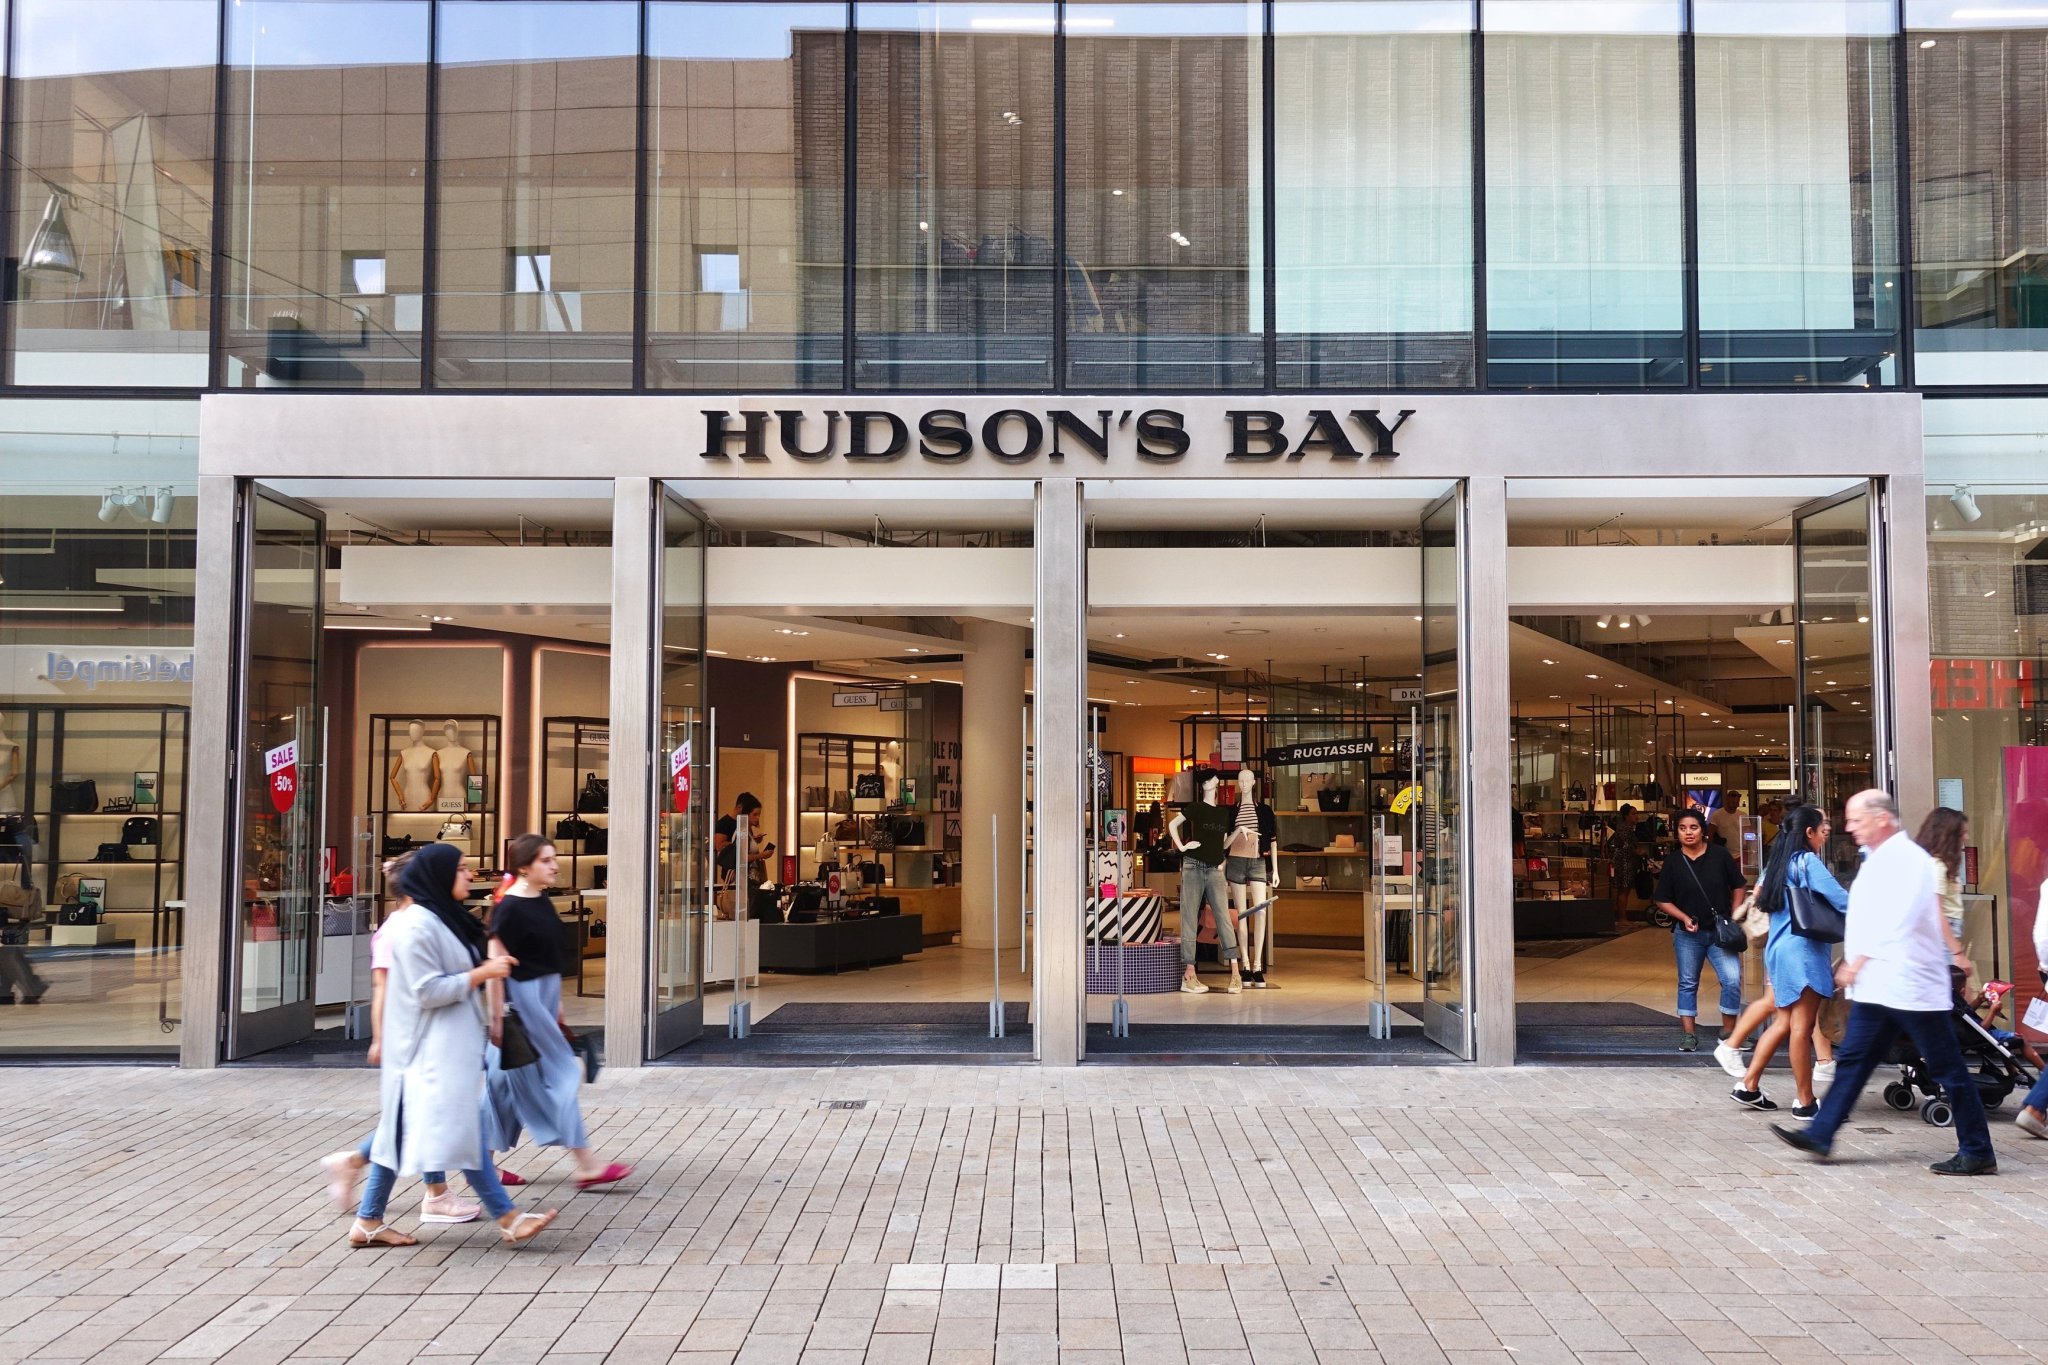 Bay Days Are Back At Hudson's Bay With The Lowest Prices Of The Season & Up To 70% Off